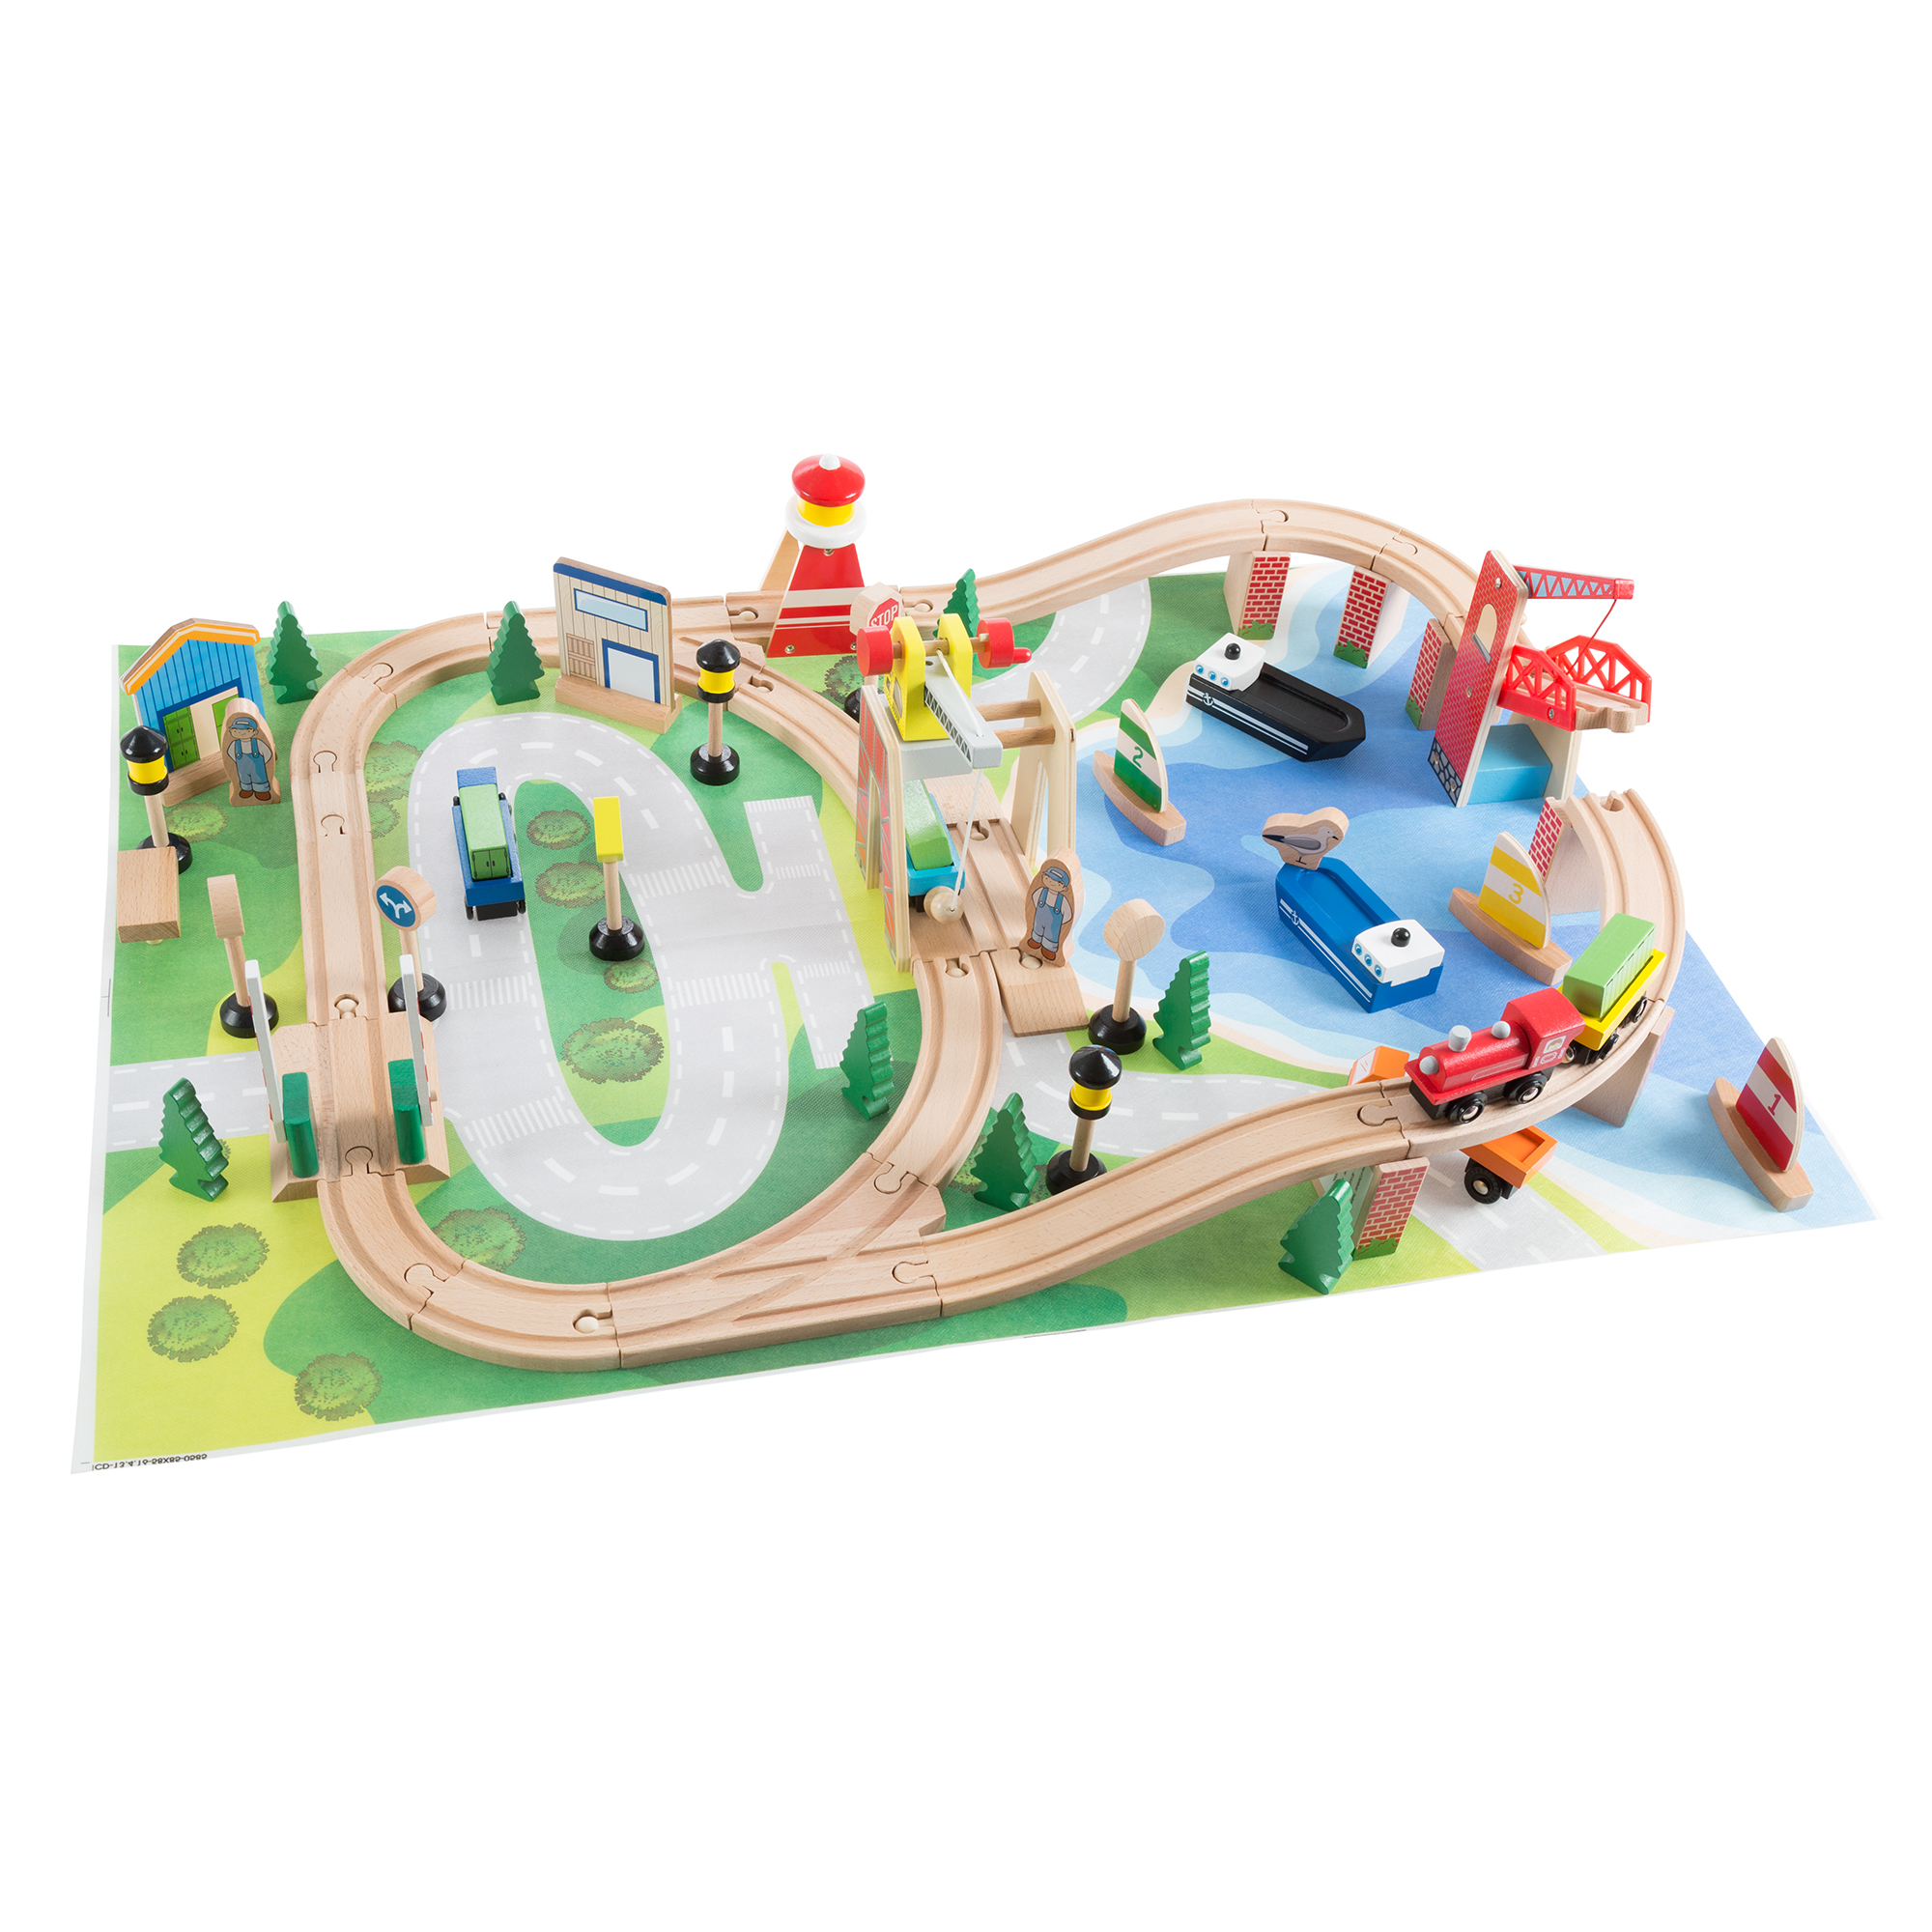 65 Pc Kids Toys Play Wooden Train Set Accessories And Play Mat 33 X 22 Inches Toddlers Boys And Girls